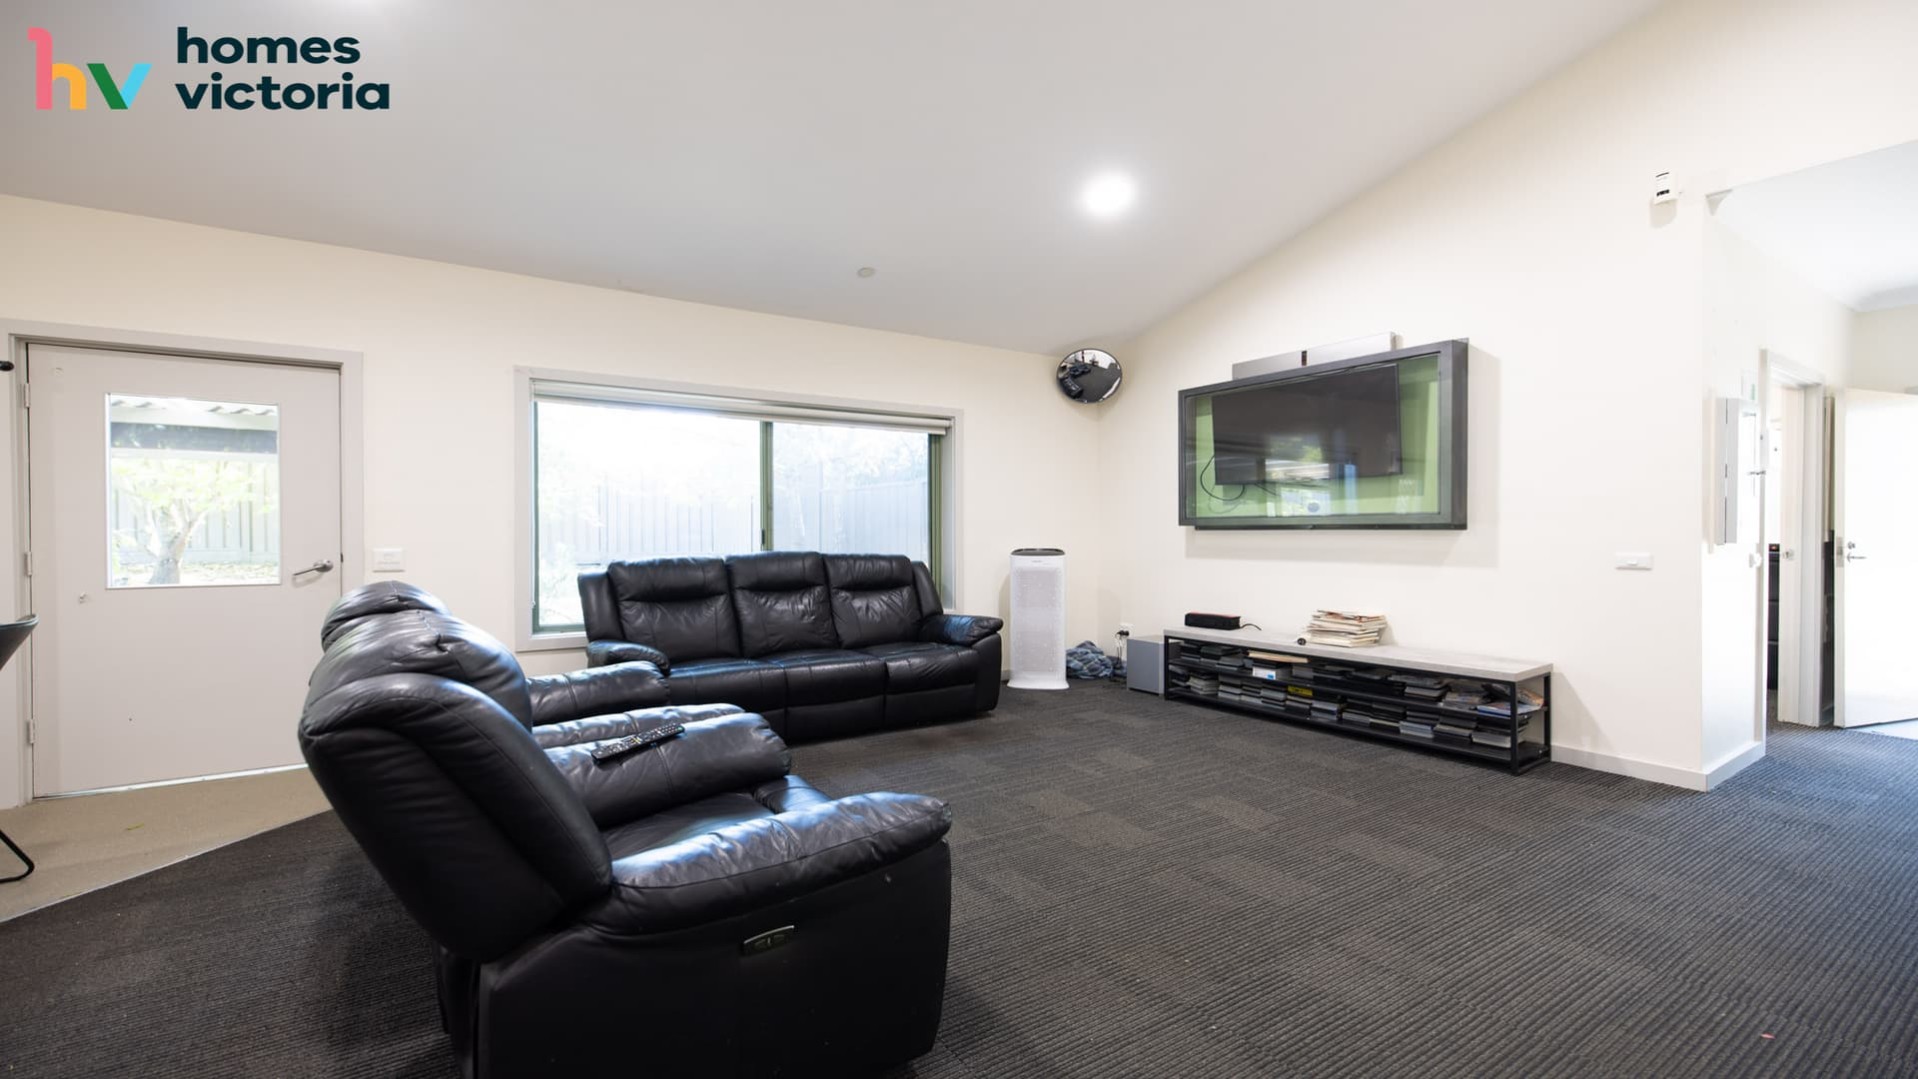 spacious lounge room with grey carpet, black leather armchairs and lounge setting facing a wall mounted television.